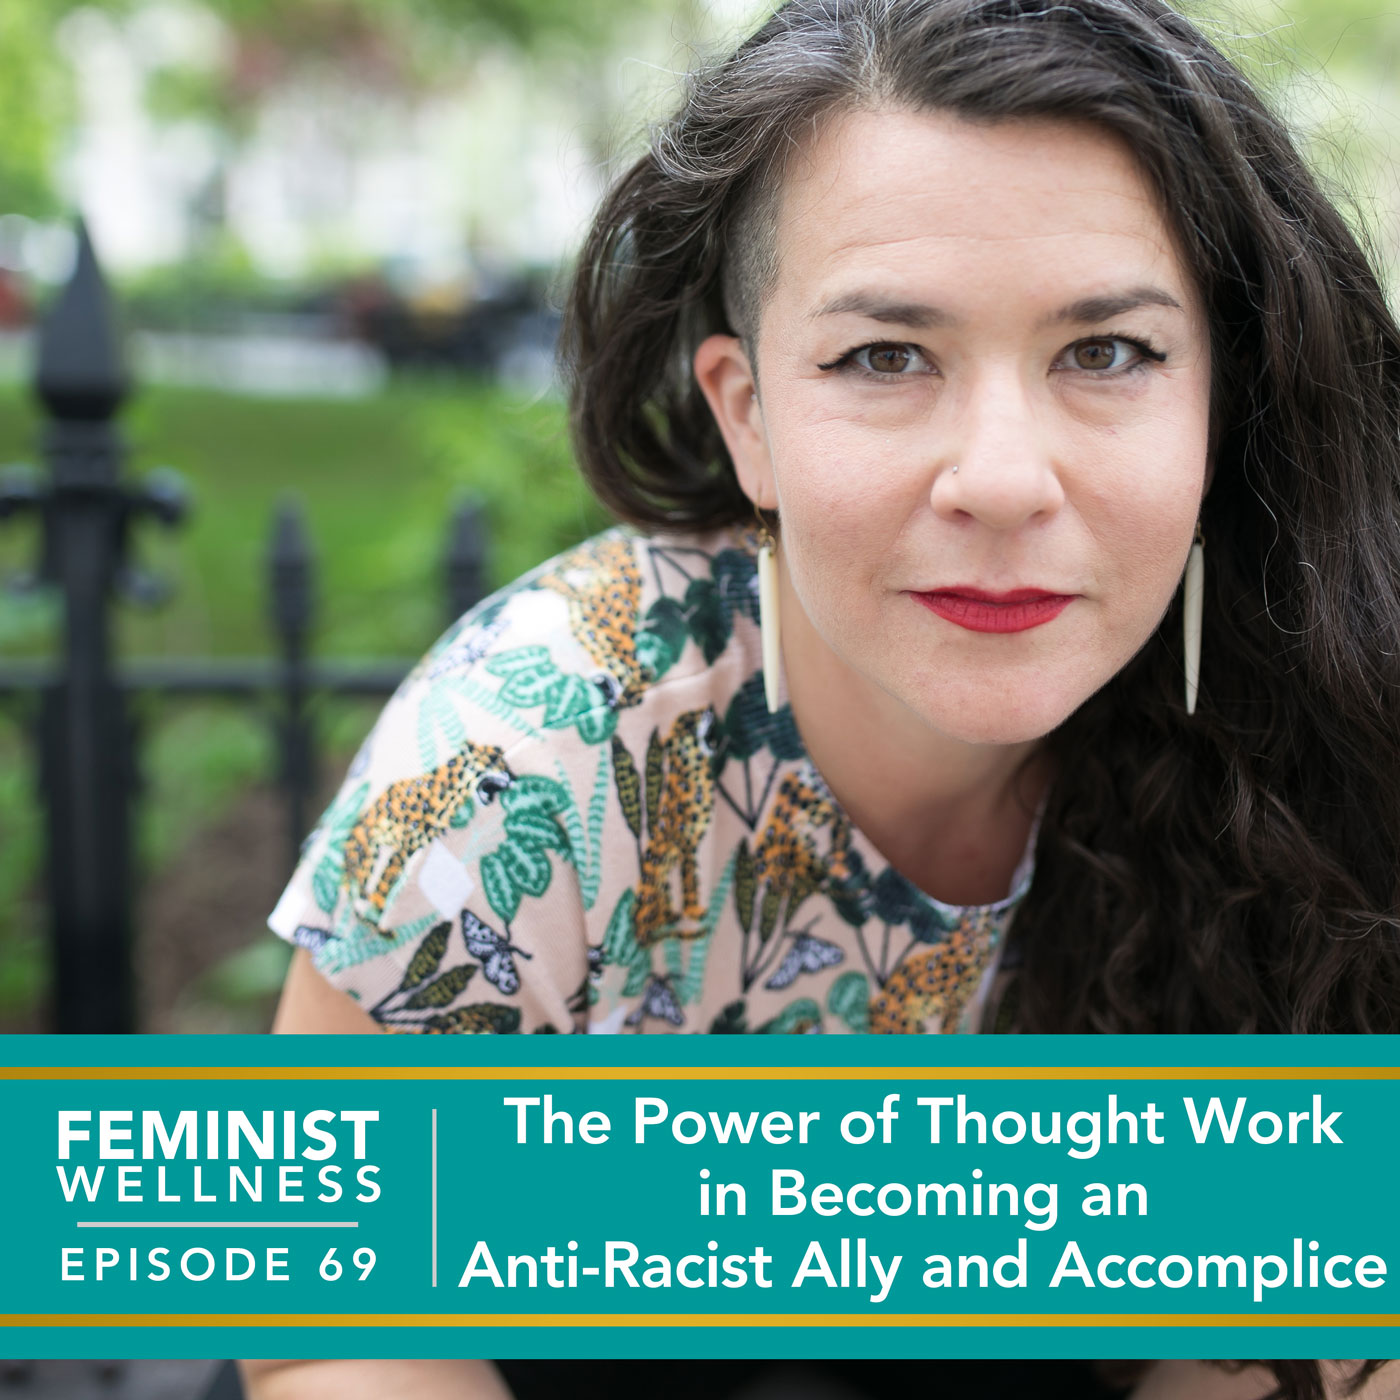 The Power of Thought Work in Becoming an Anti-Racist Ally and Accomplice